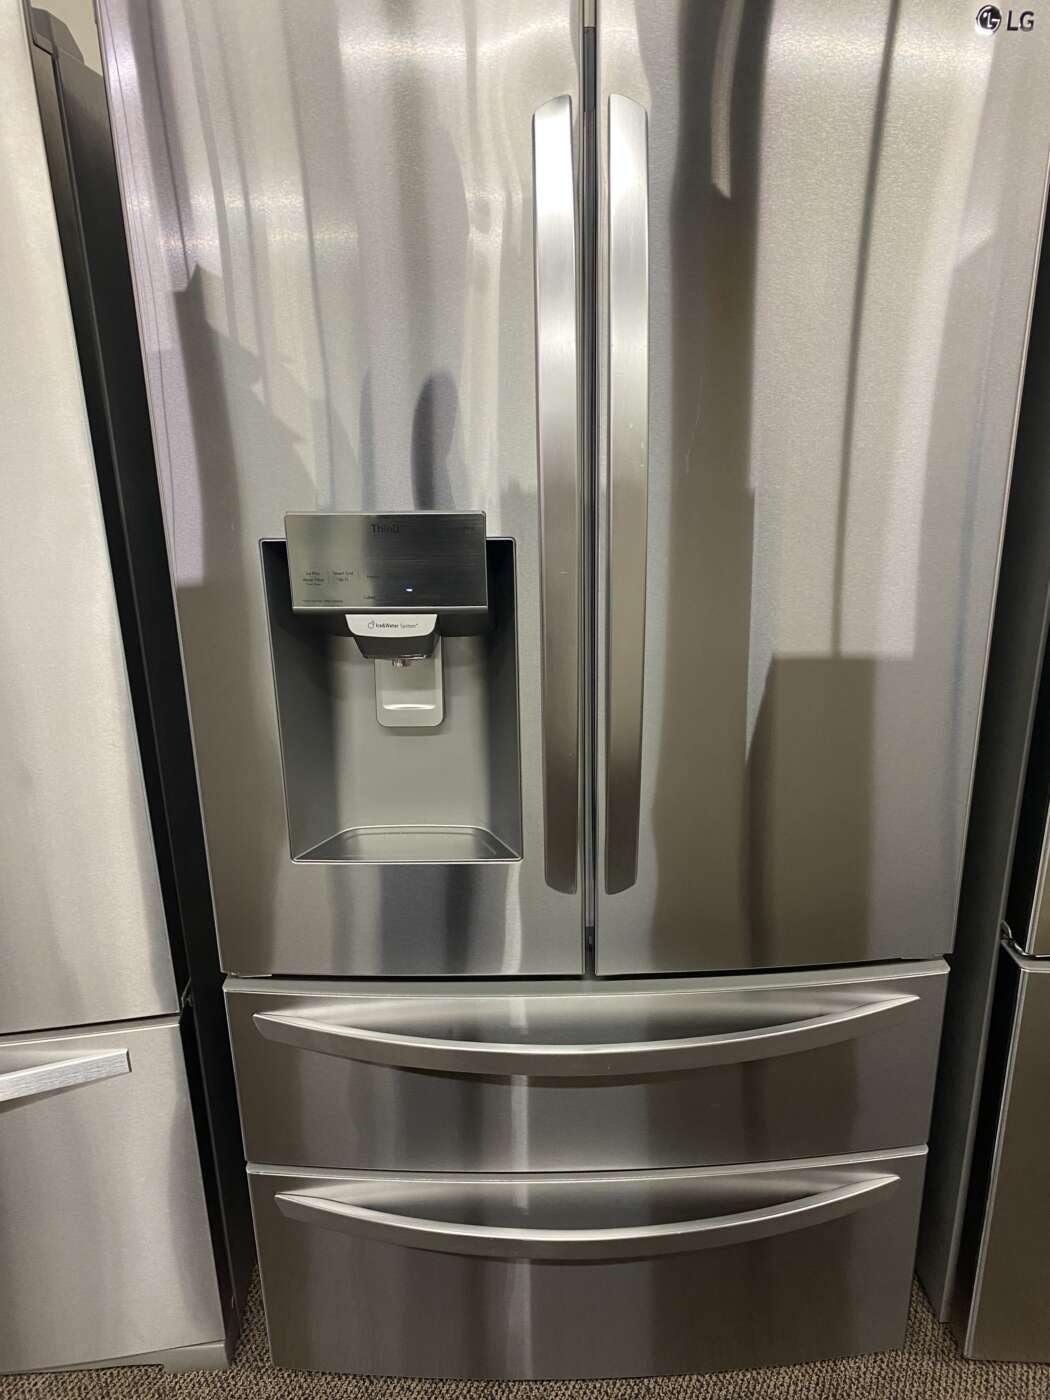 Reconditioned LG 28Cu. Ft. French Door Stainless Steel Refrigerator